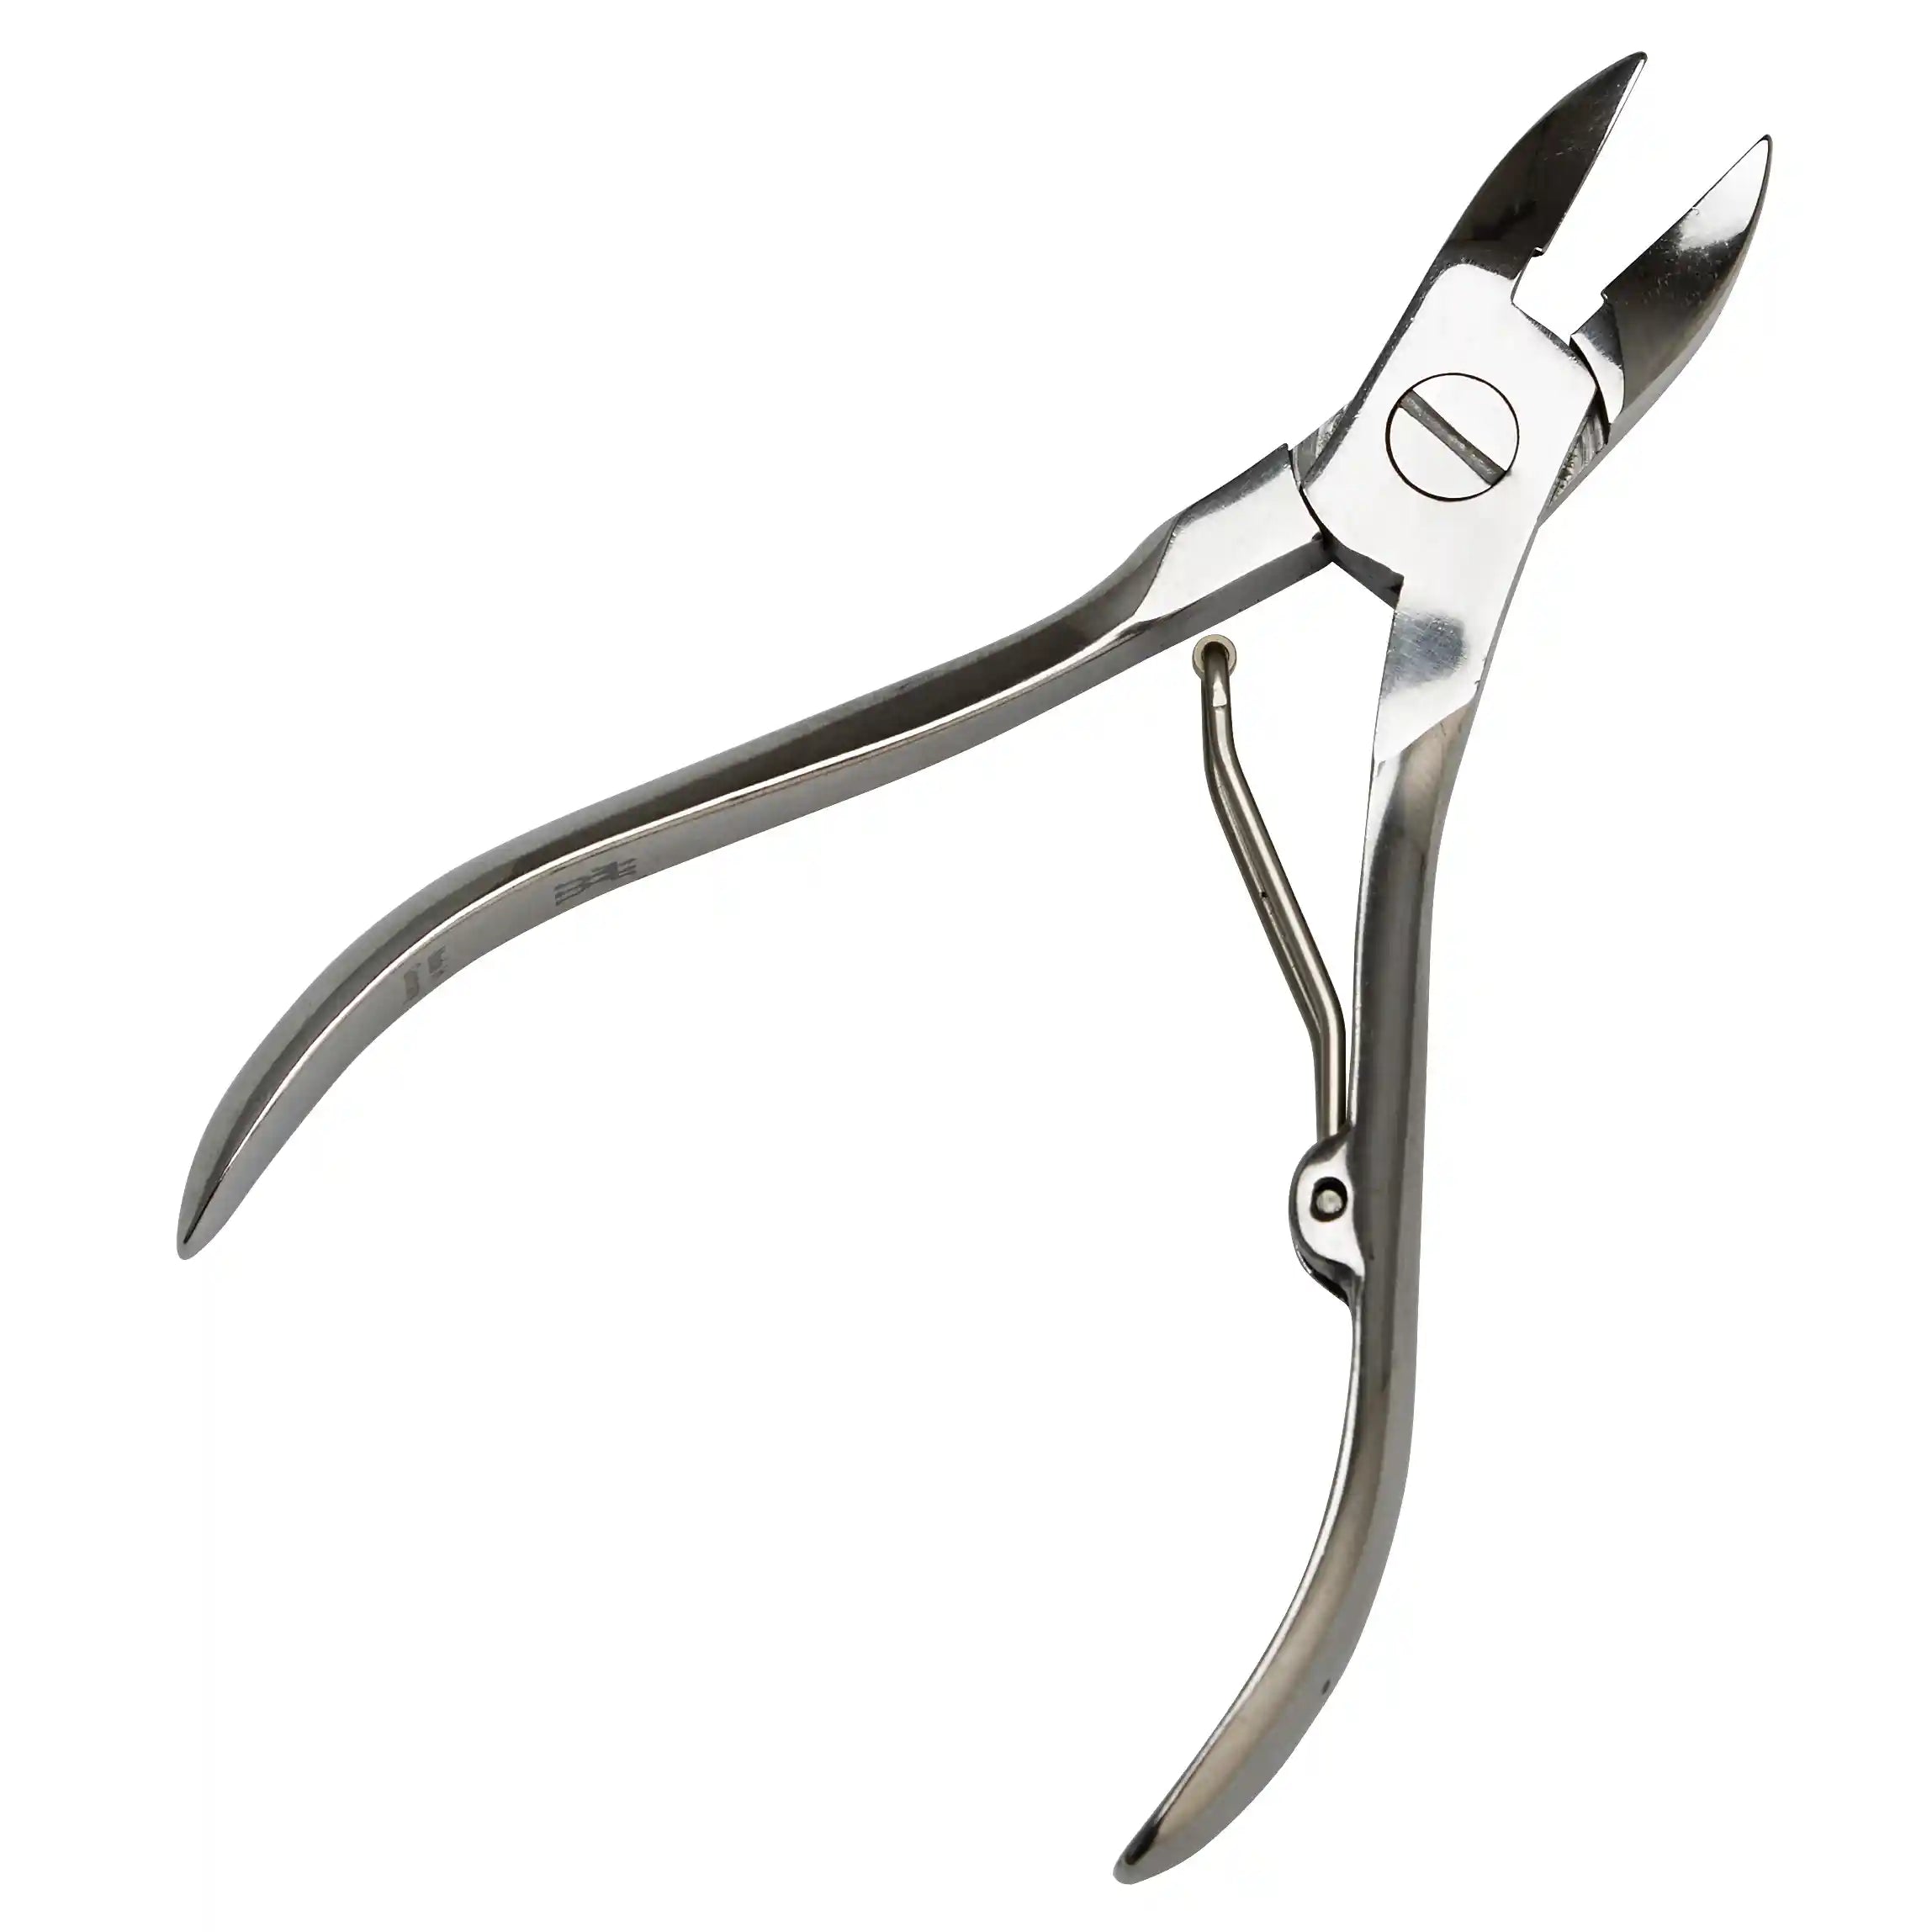 Pince à ongles Zwilling Classic Inox 11 cm - argent poli